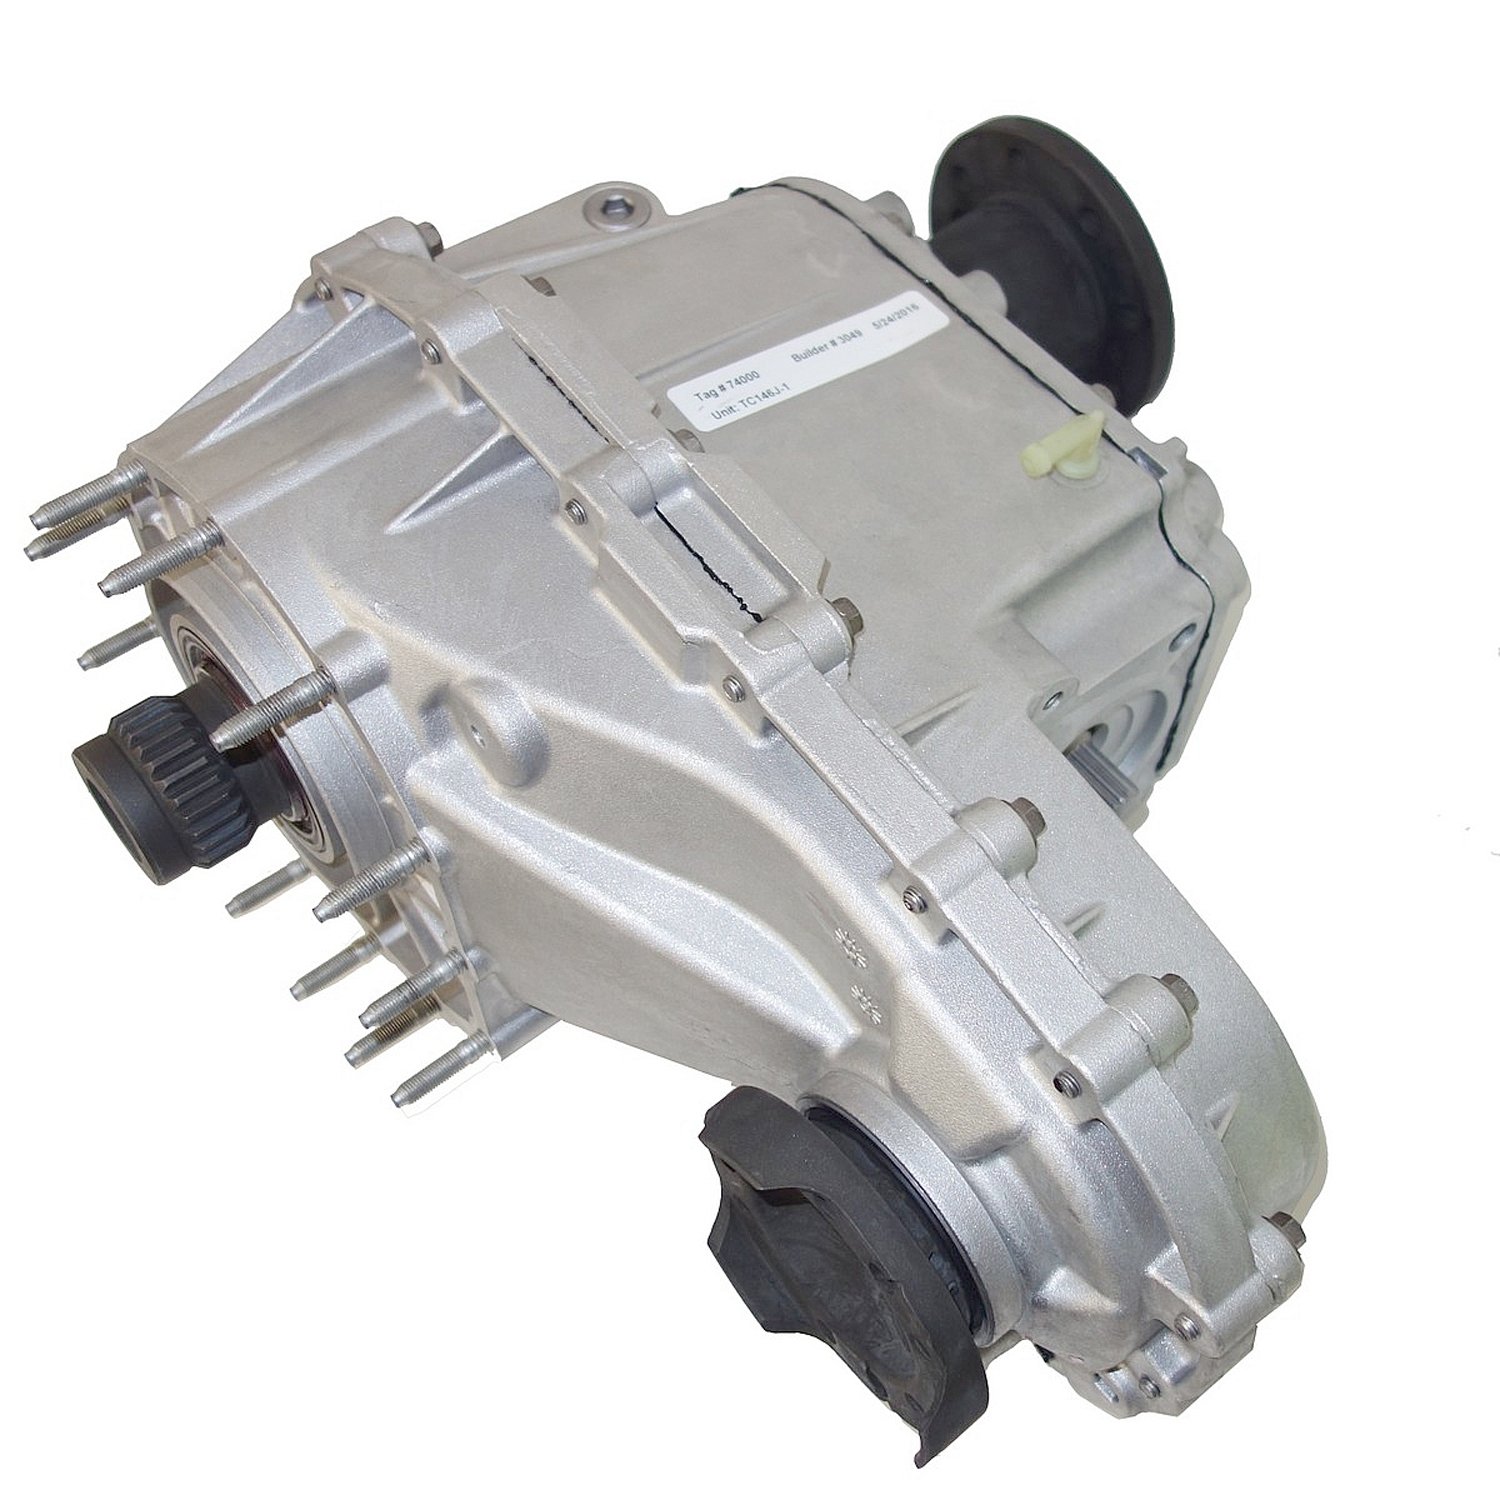 Remanufactured BW146 Transfer Case for Jeep 06-10 Grand Cherokee 601L